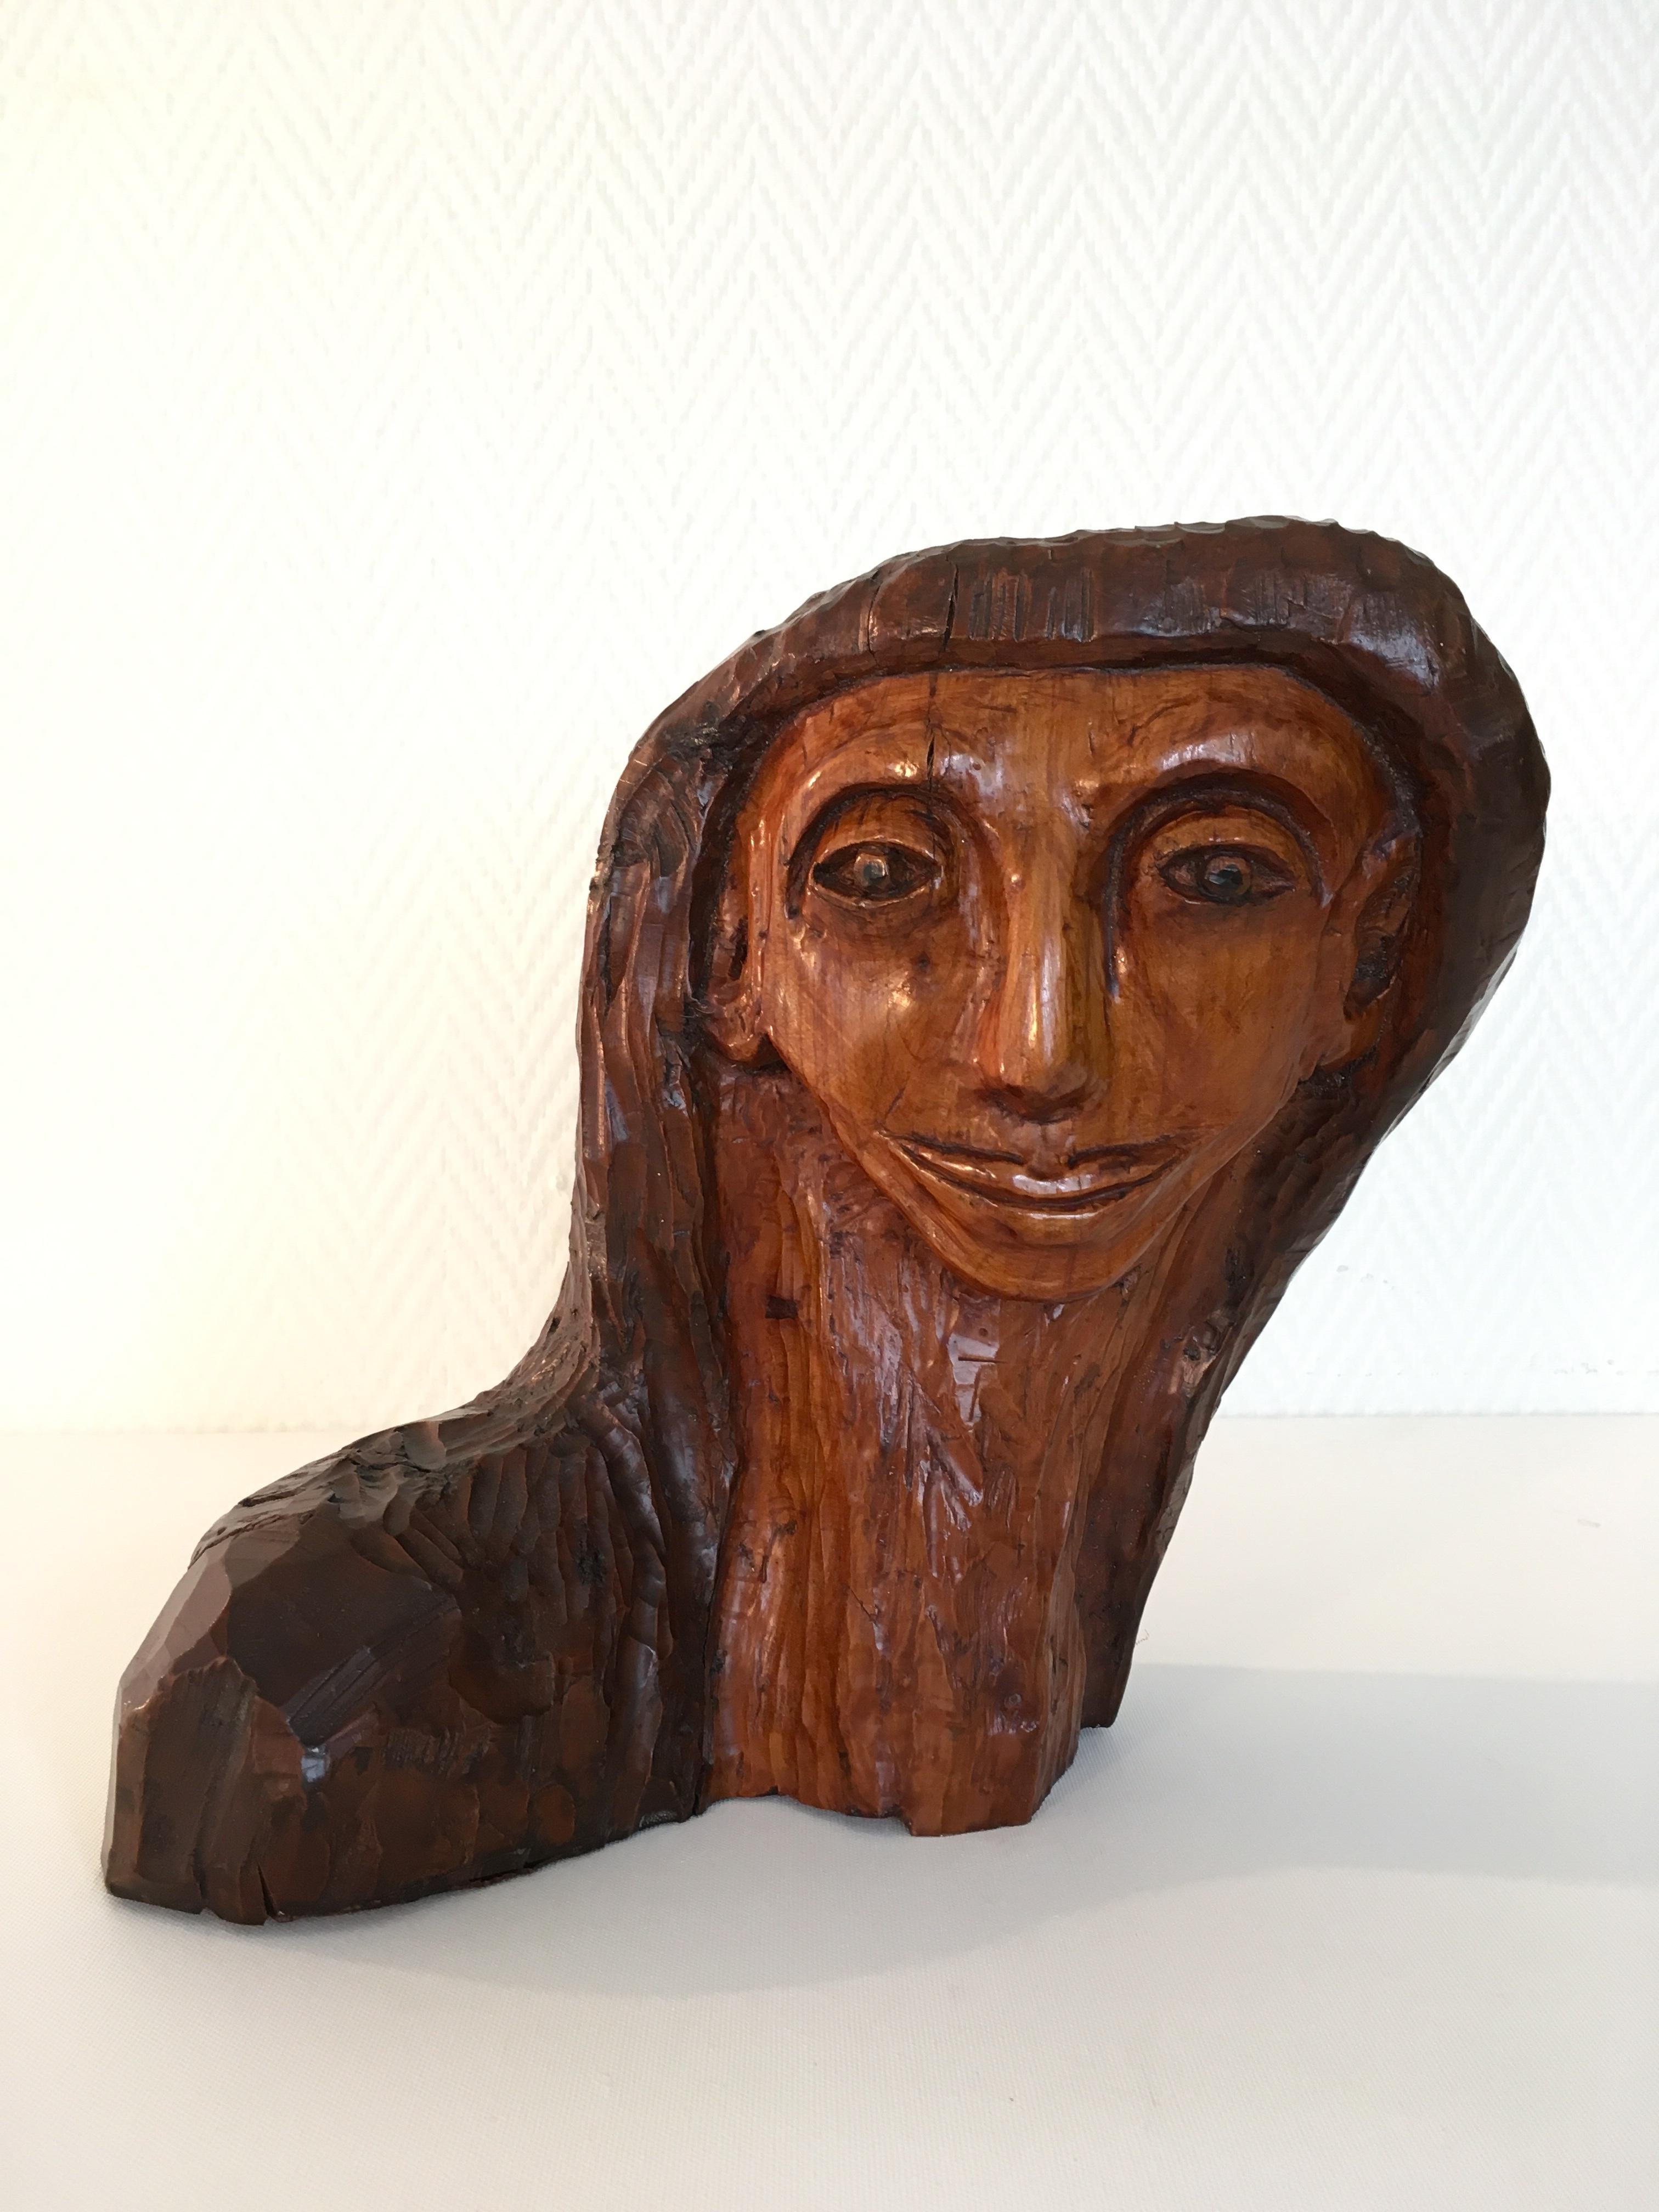 Very unusual piece! This wooden hand carved Woman's head was carved from one piece of hardwood, stained and lacquered. It has a very midcentury look. Underneath it is signed with a marker 'C.A.F. vd/ Valk 1995' but we are not sure if this was